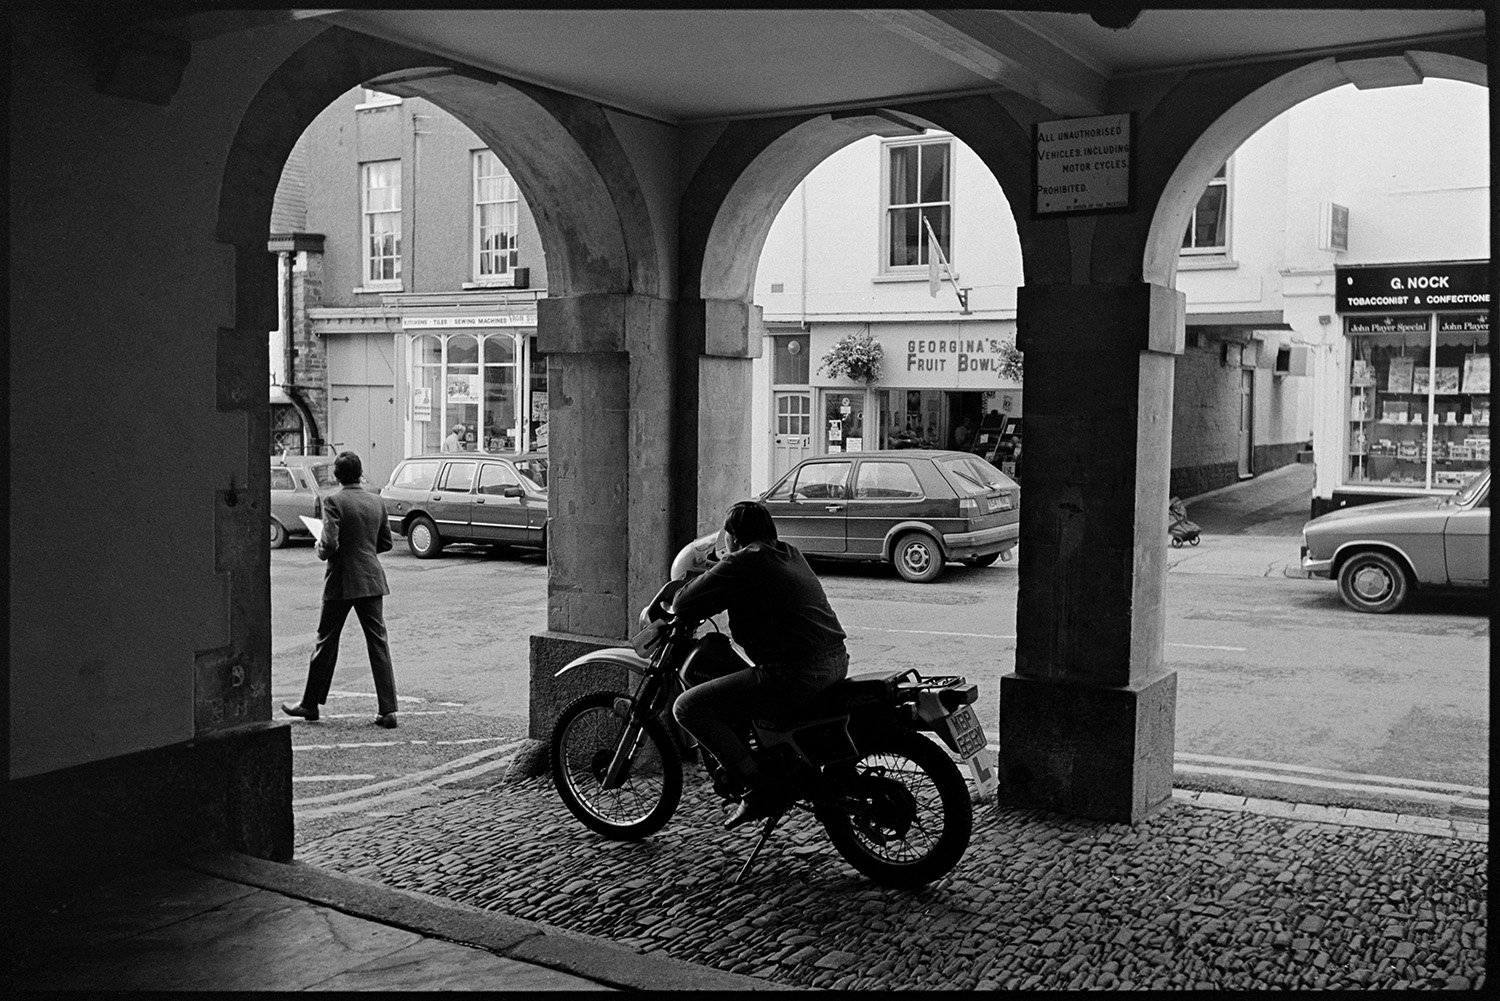 Men chatting under Town Hall arches, motorbike rider parked. 
[A motorcyclist sat on his parked motorbike on the cobbles under the arches of the Town Hall in Torrington. Parked cars and shop fronts can be seen on the opposite side of the street, including 'Georgina's Fruit Bowl' and 'G Nock Tobacconist and Confectioner'.]